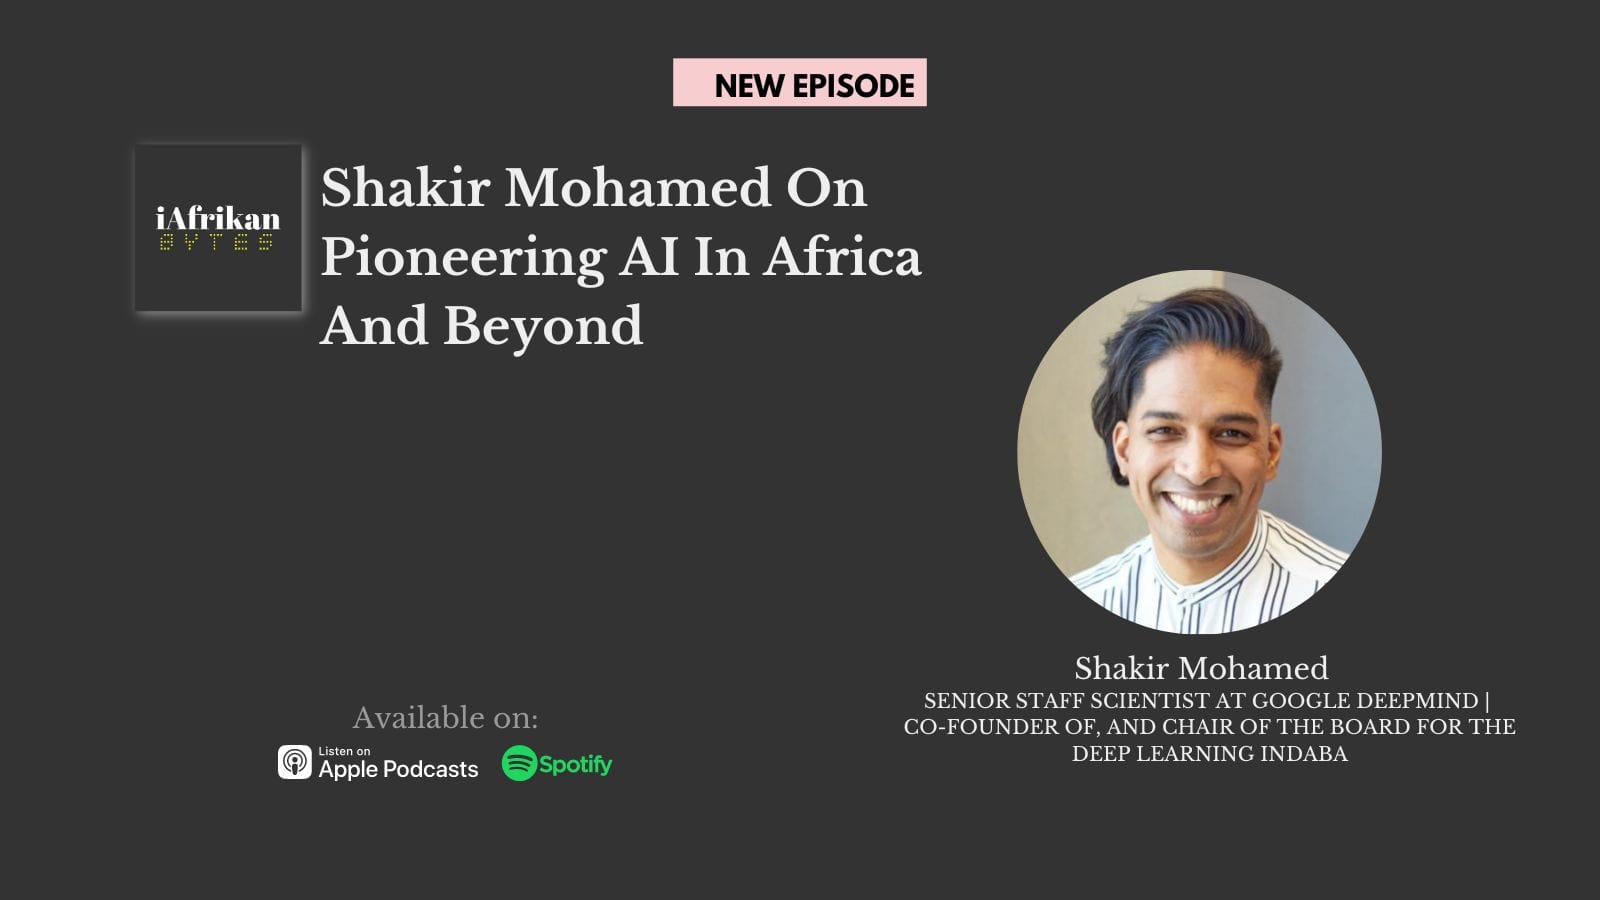 Shakir Mohamed on Pioneering AI in Africa and Beyond